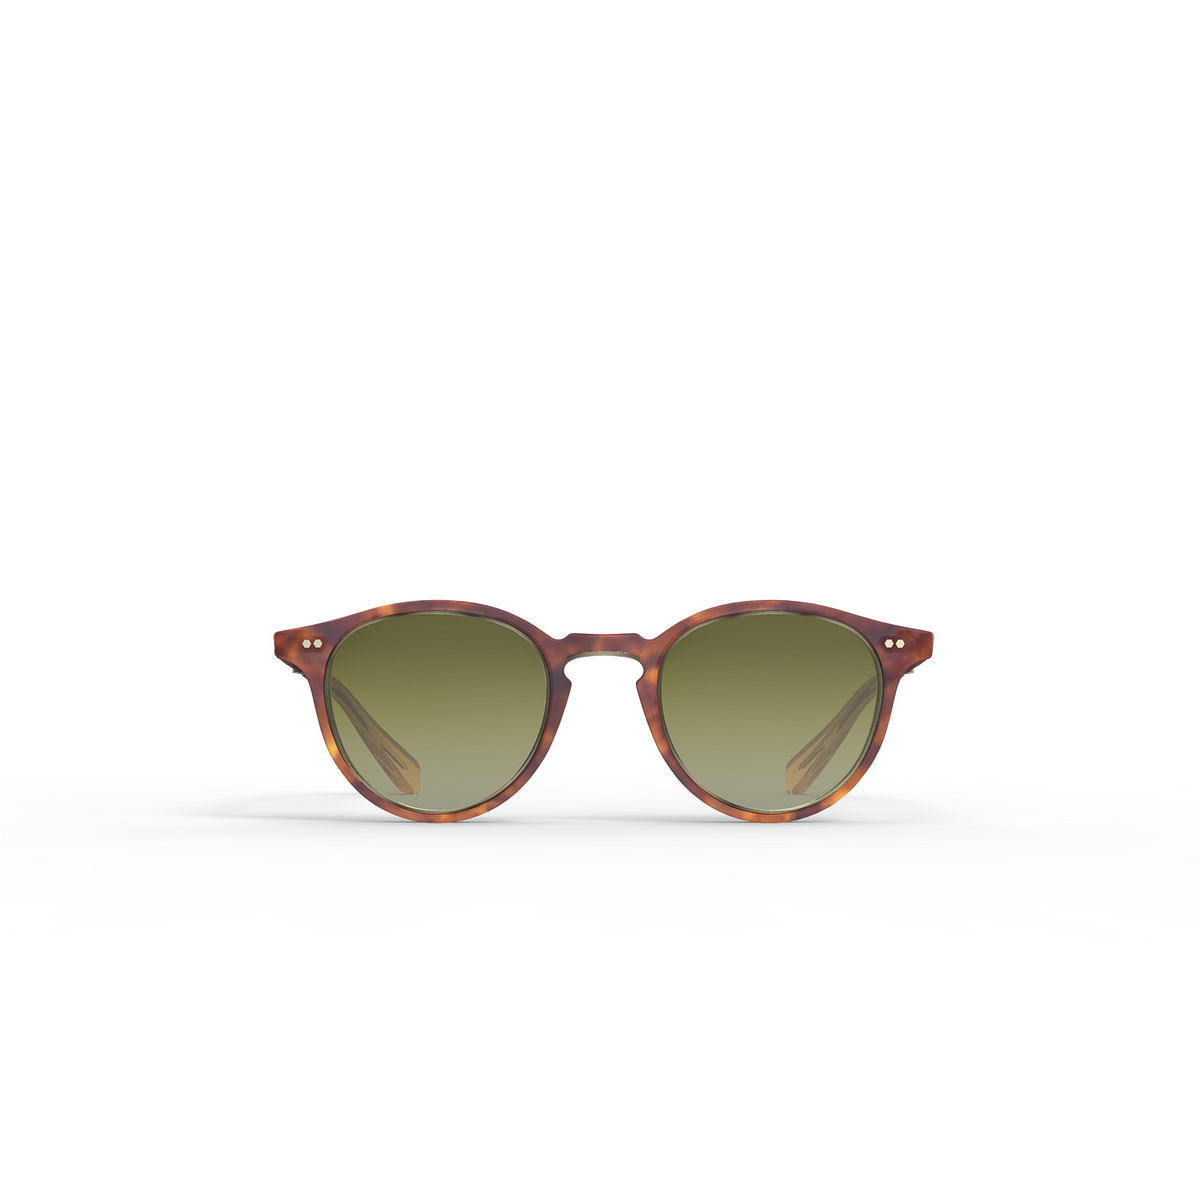 Mr. Leight MARMONT II S Sunglasses CACT-ATG/ELM Cacao Tortoise-Antique Gold - front view